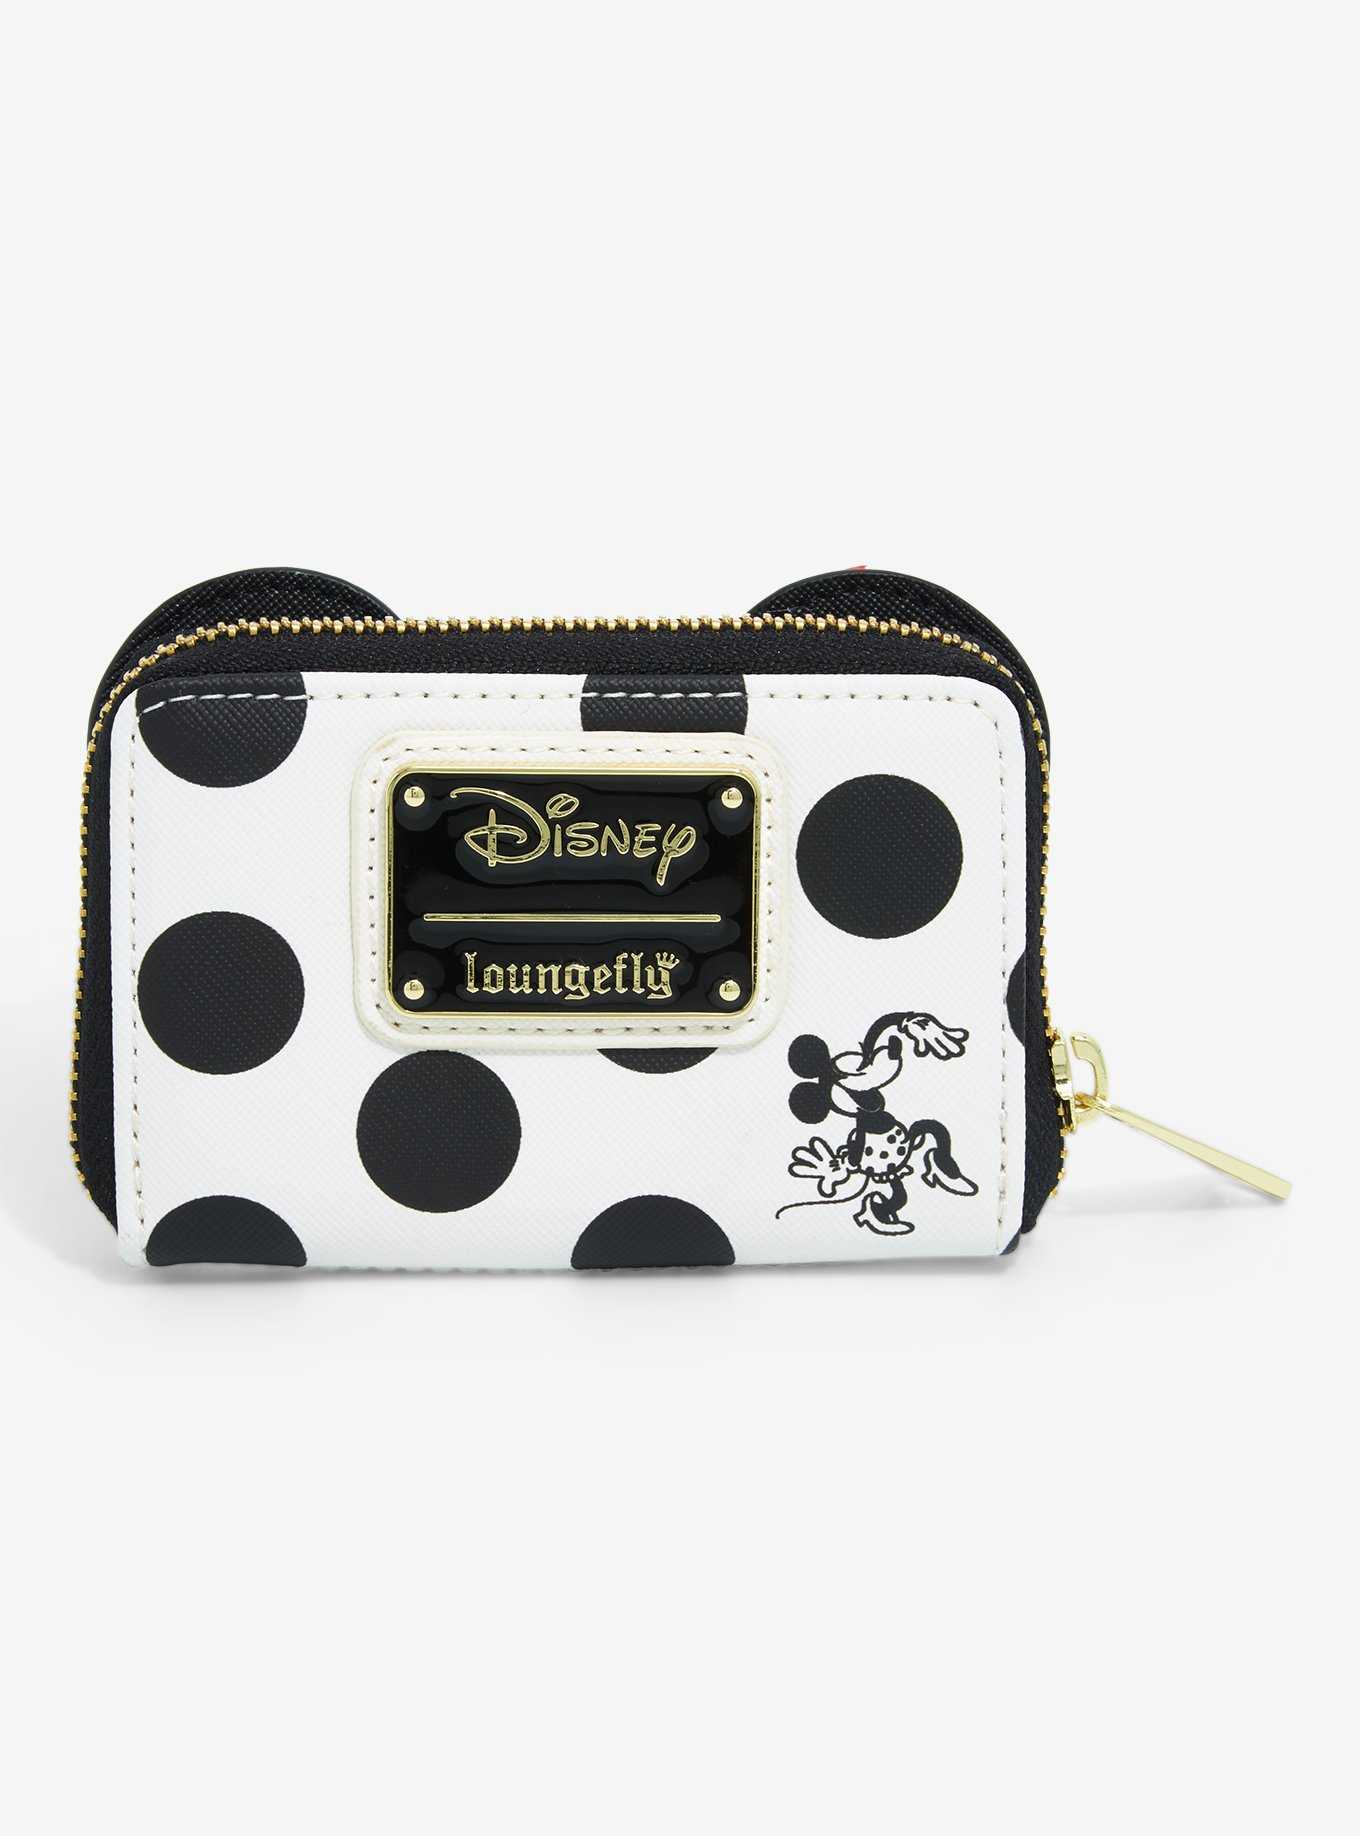 Loungefly Disney Minnie Mouse Black & Red Polka Dot Zipper Wallet, , hi-res